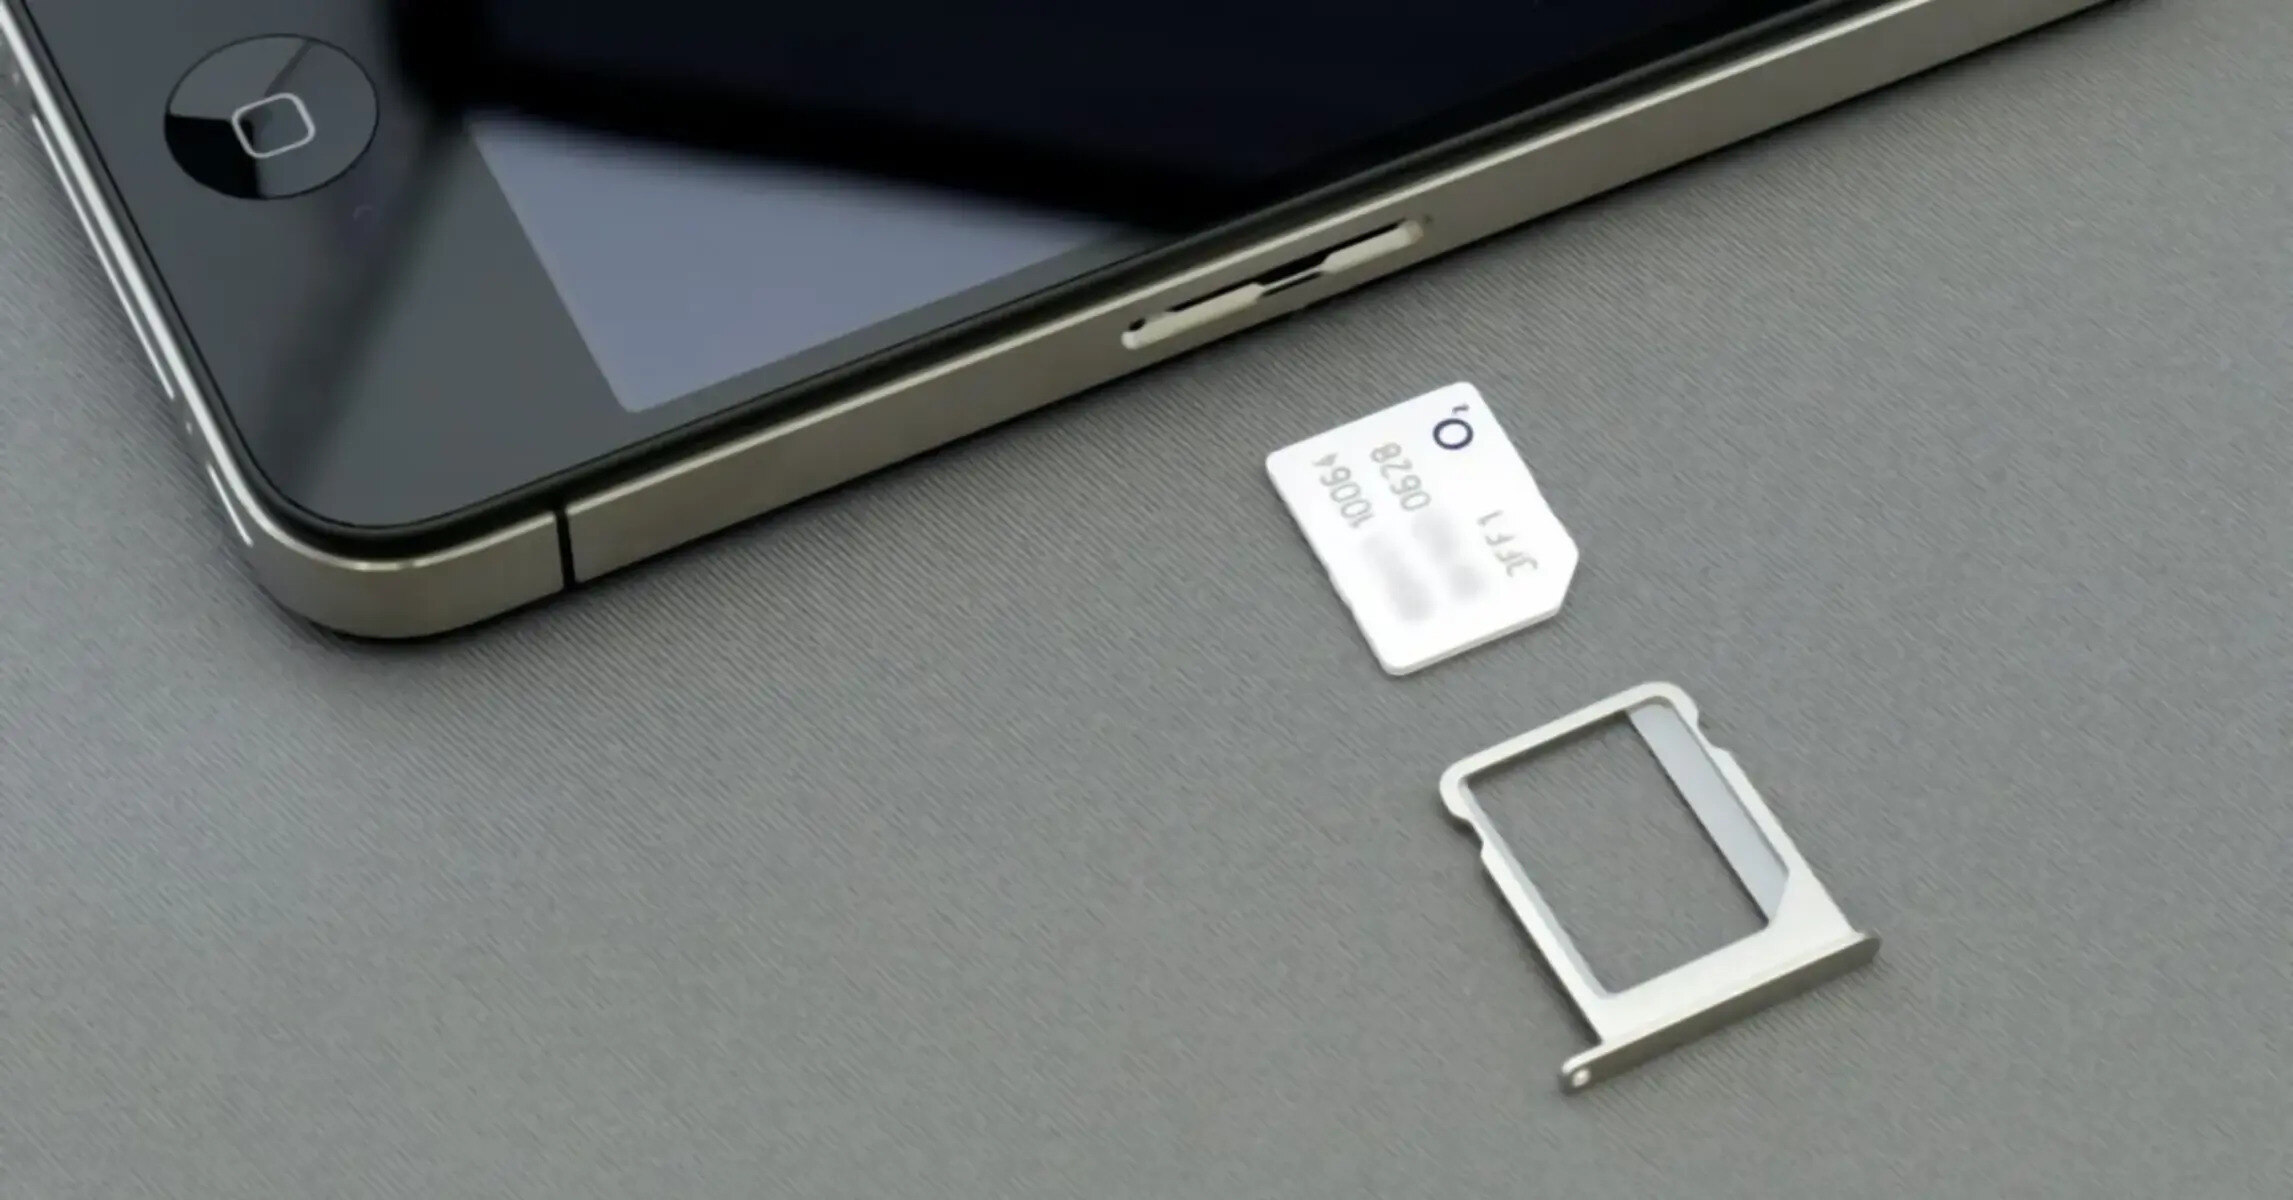 removing-the-sim-card-from-an-iphone-step-by-step-guide